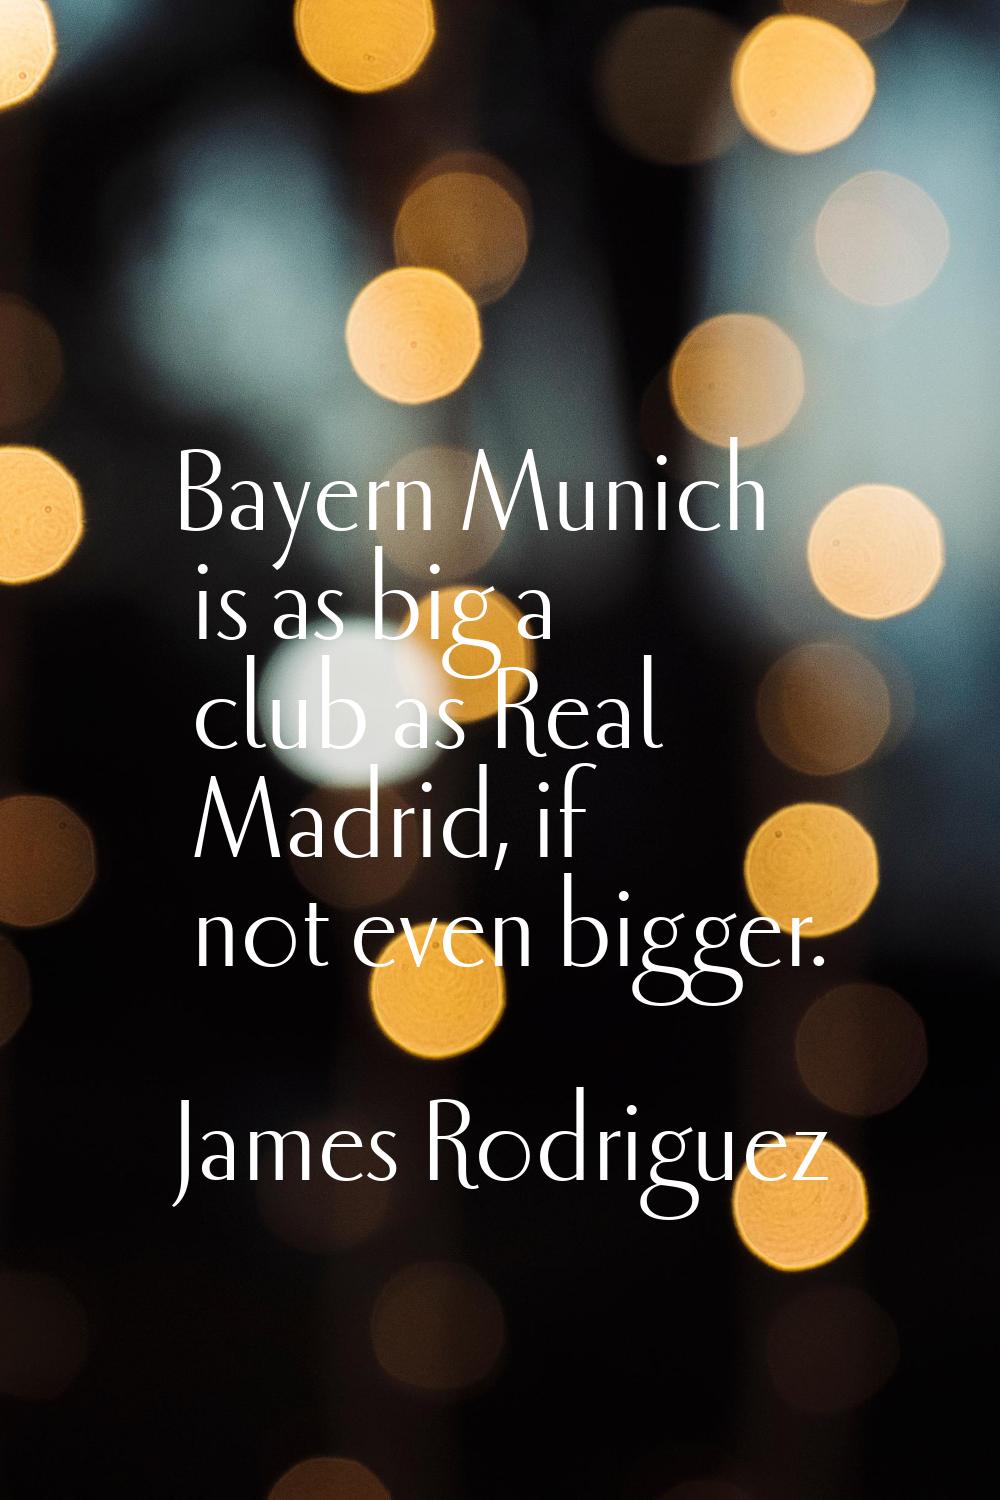 Bayern Munich is as big a club as Real Madrid, if not even bigger.